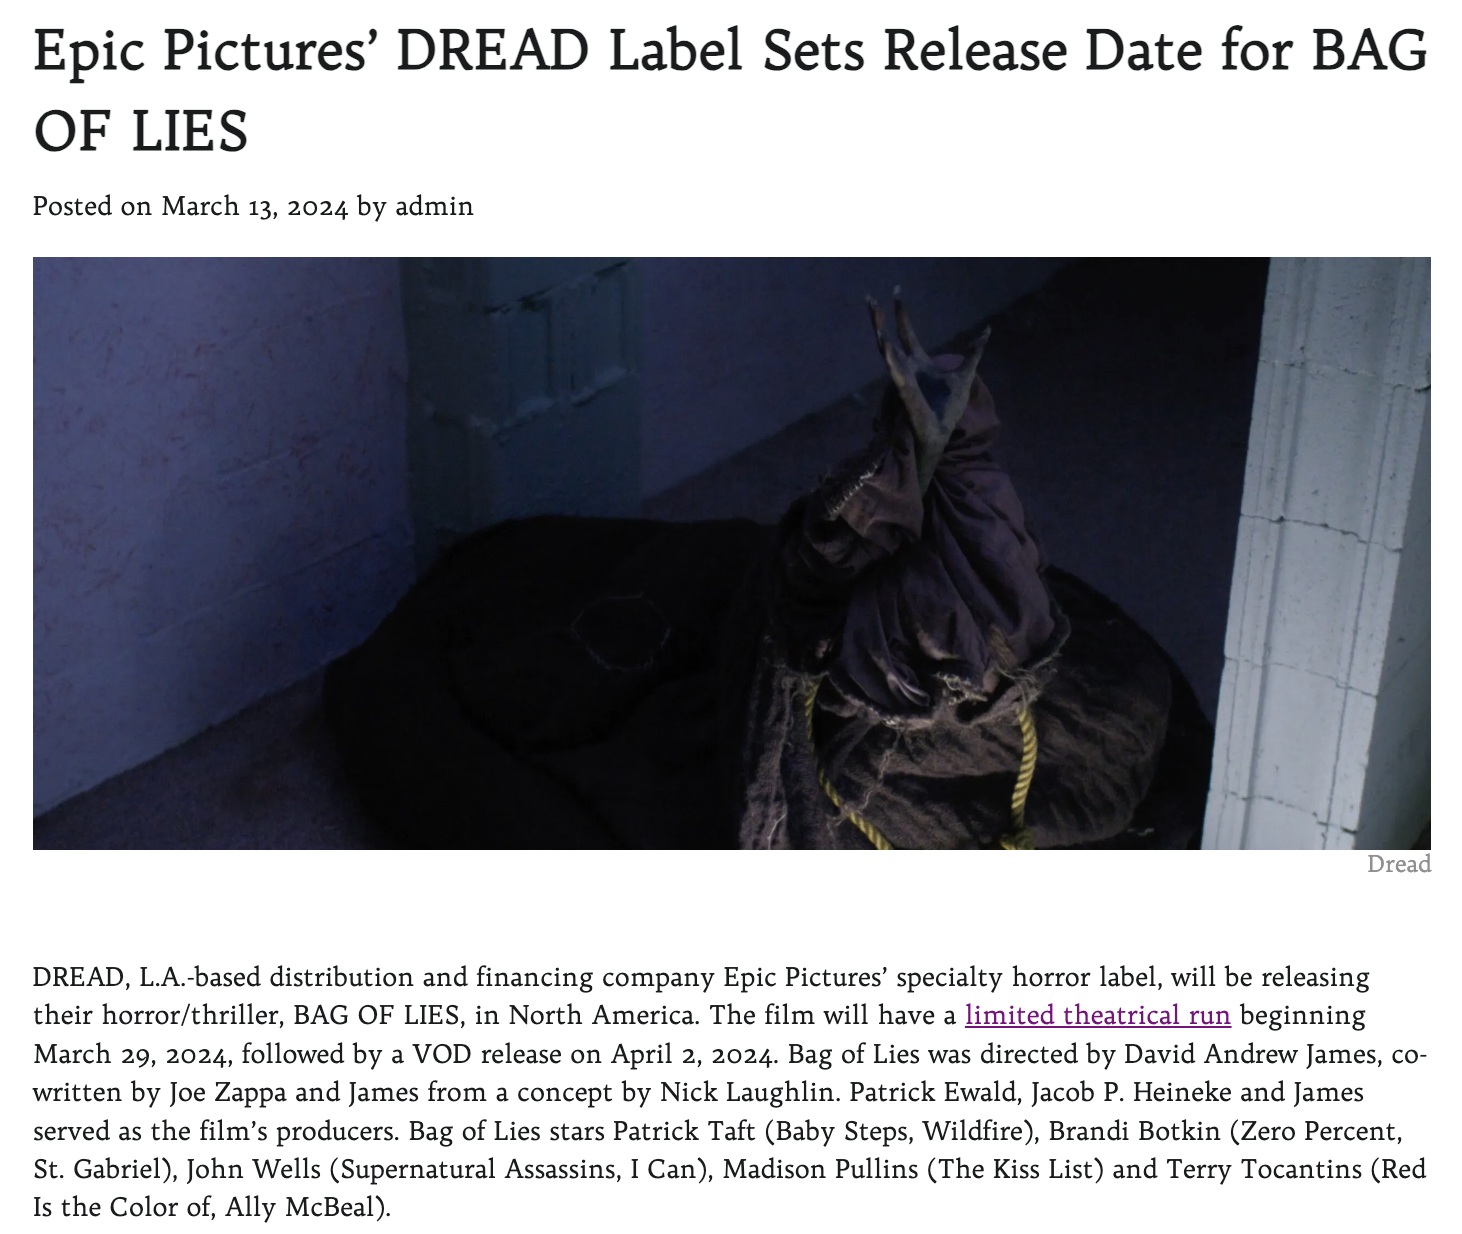 Epic Pictures’ DREAD Label Sets Release Date for BAG OF LIES